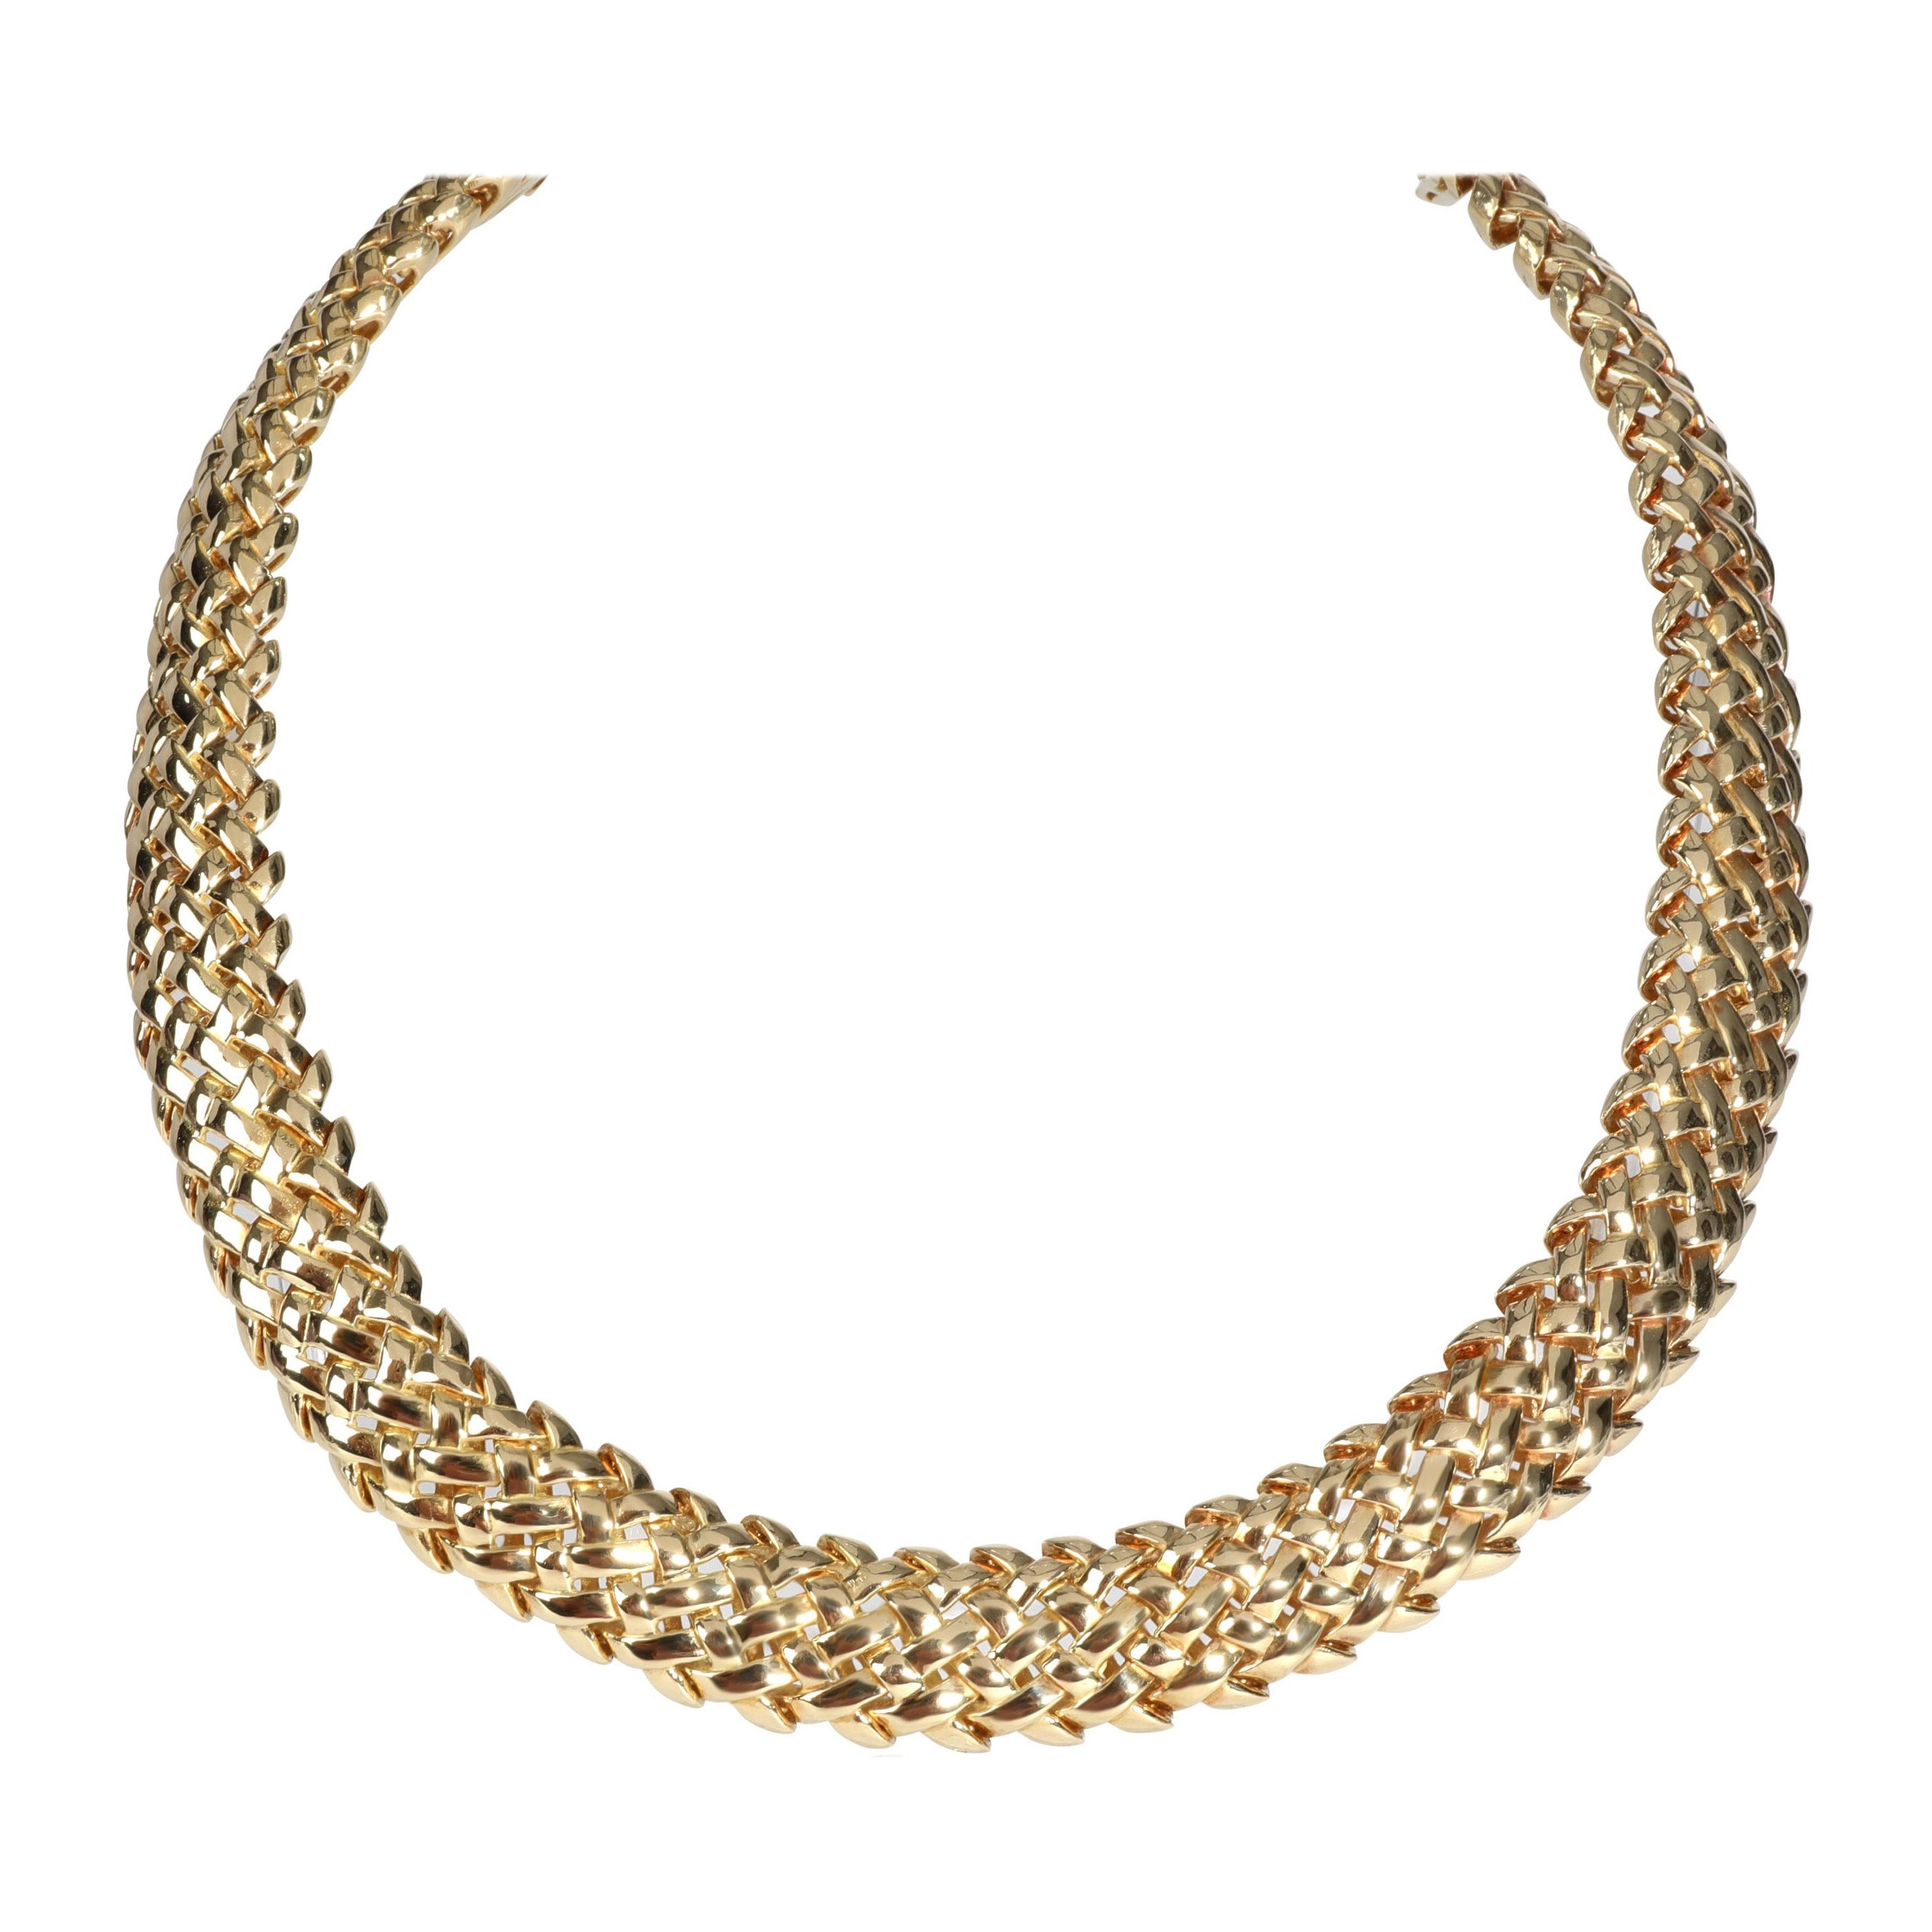 Tiffany & Co. Vannerie Necklace in 18K Yellow Gold